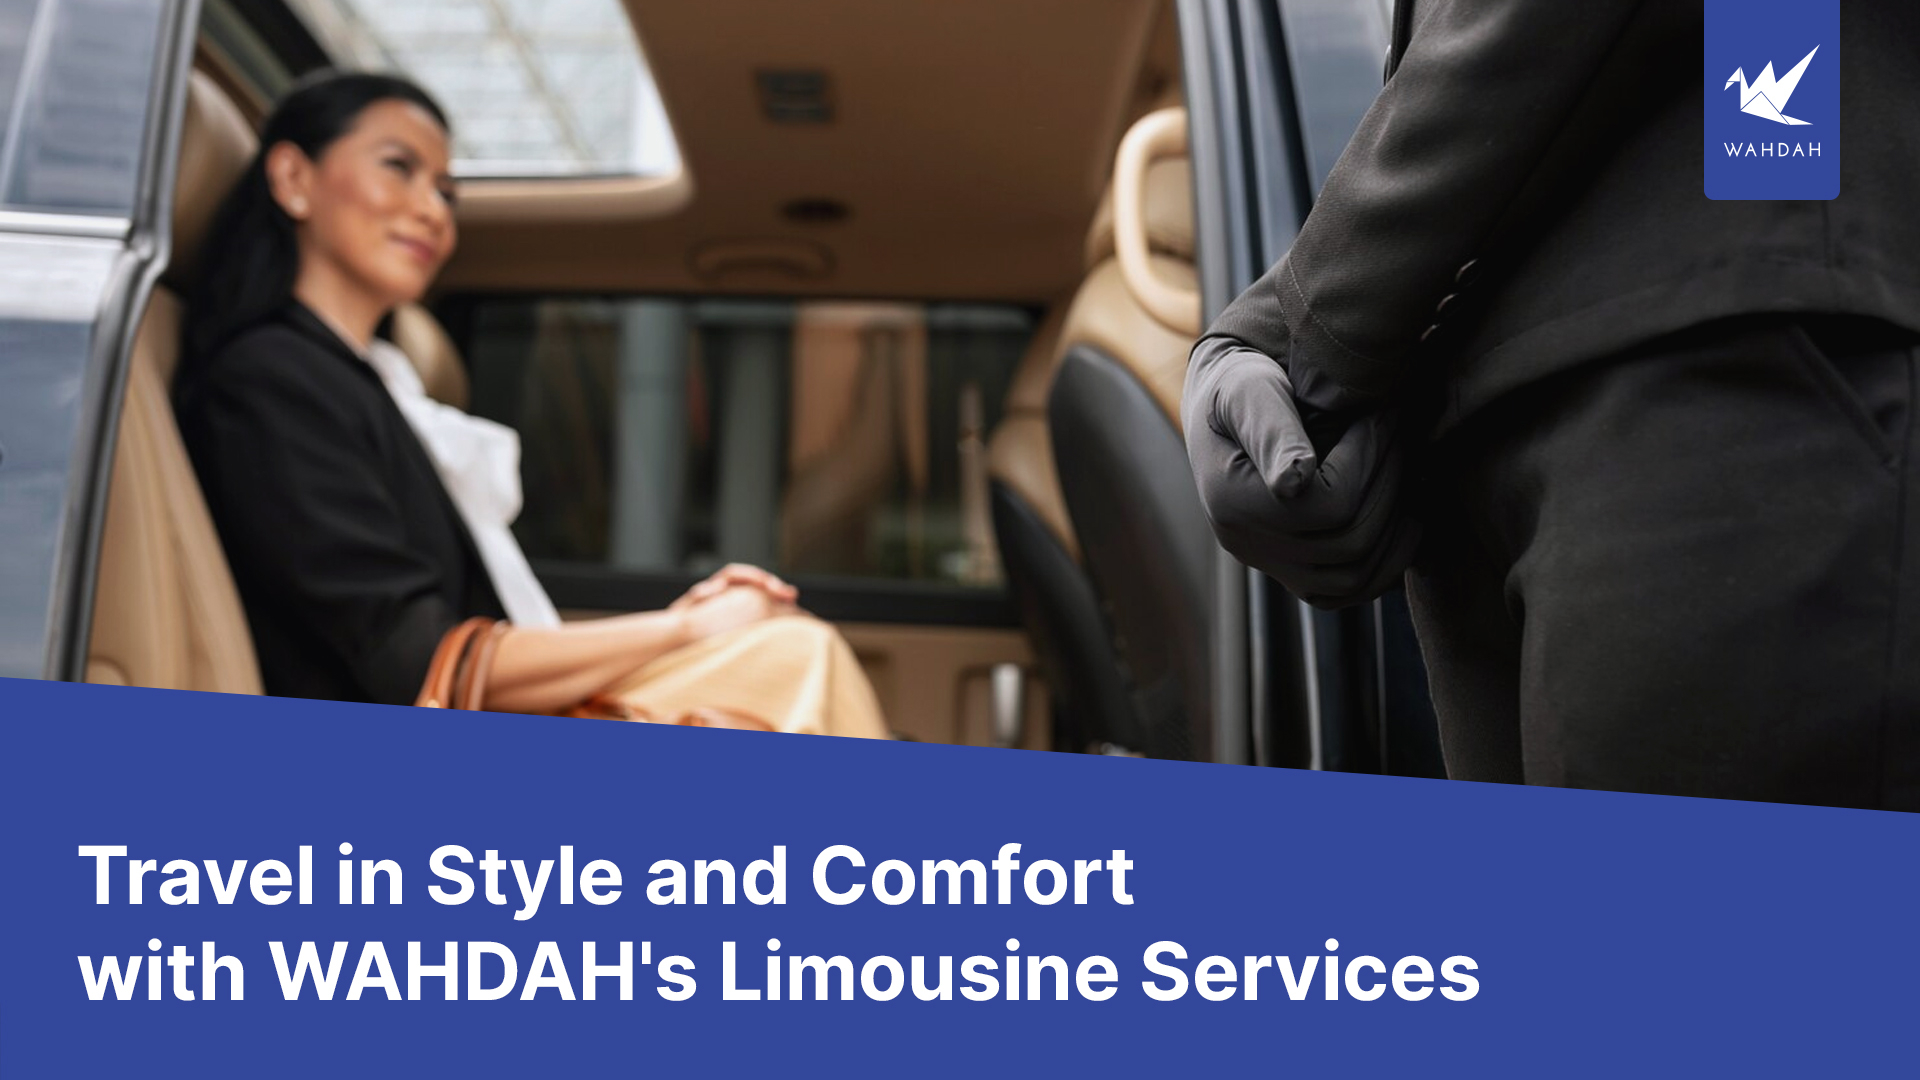 Travel in Style and Comfort with WAHDAH's Limousine Services